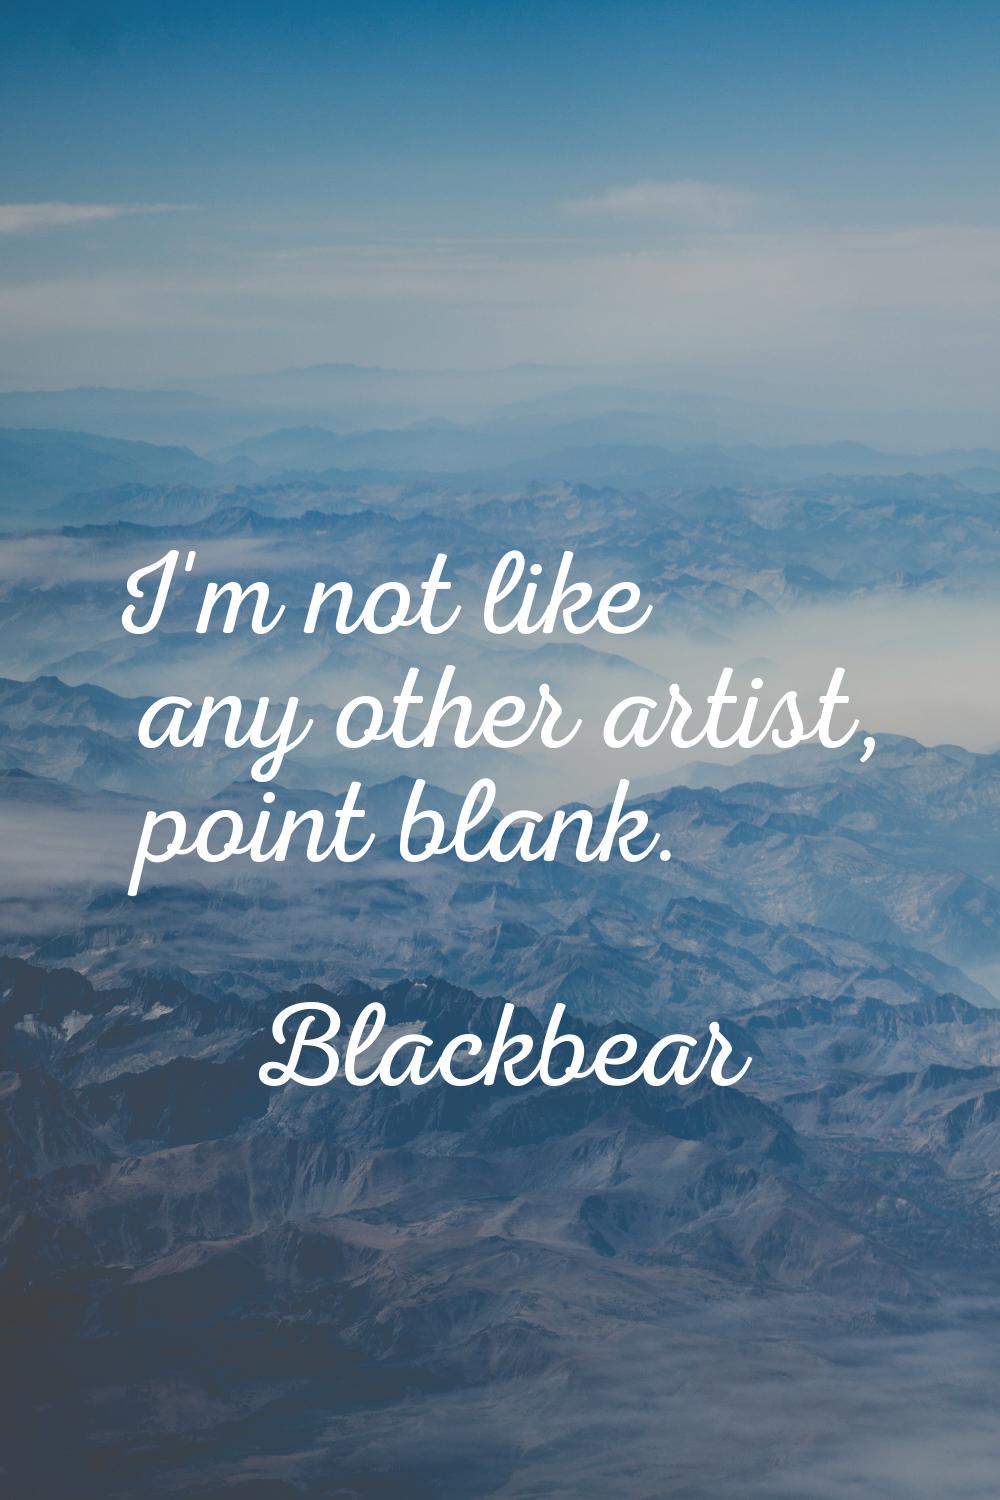 I'm not like any other artist, point blank.